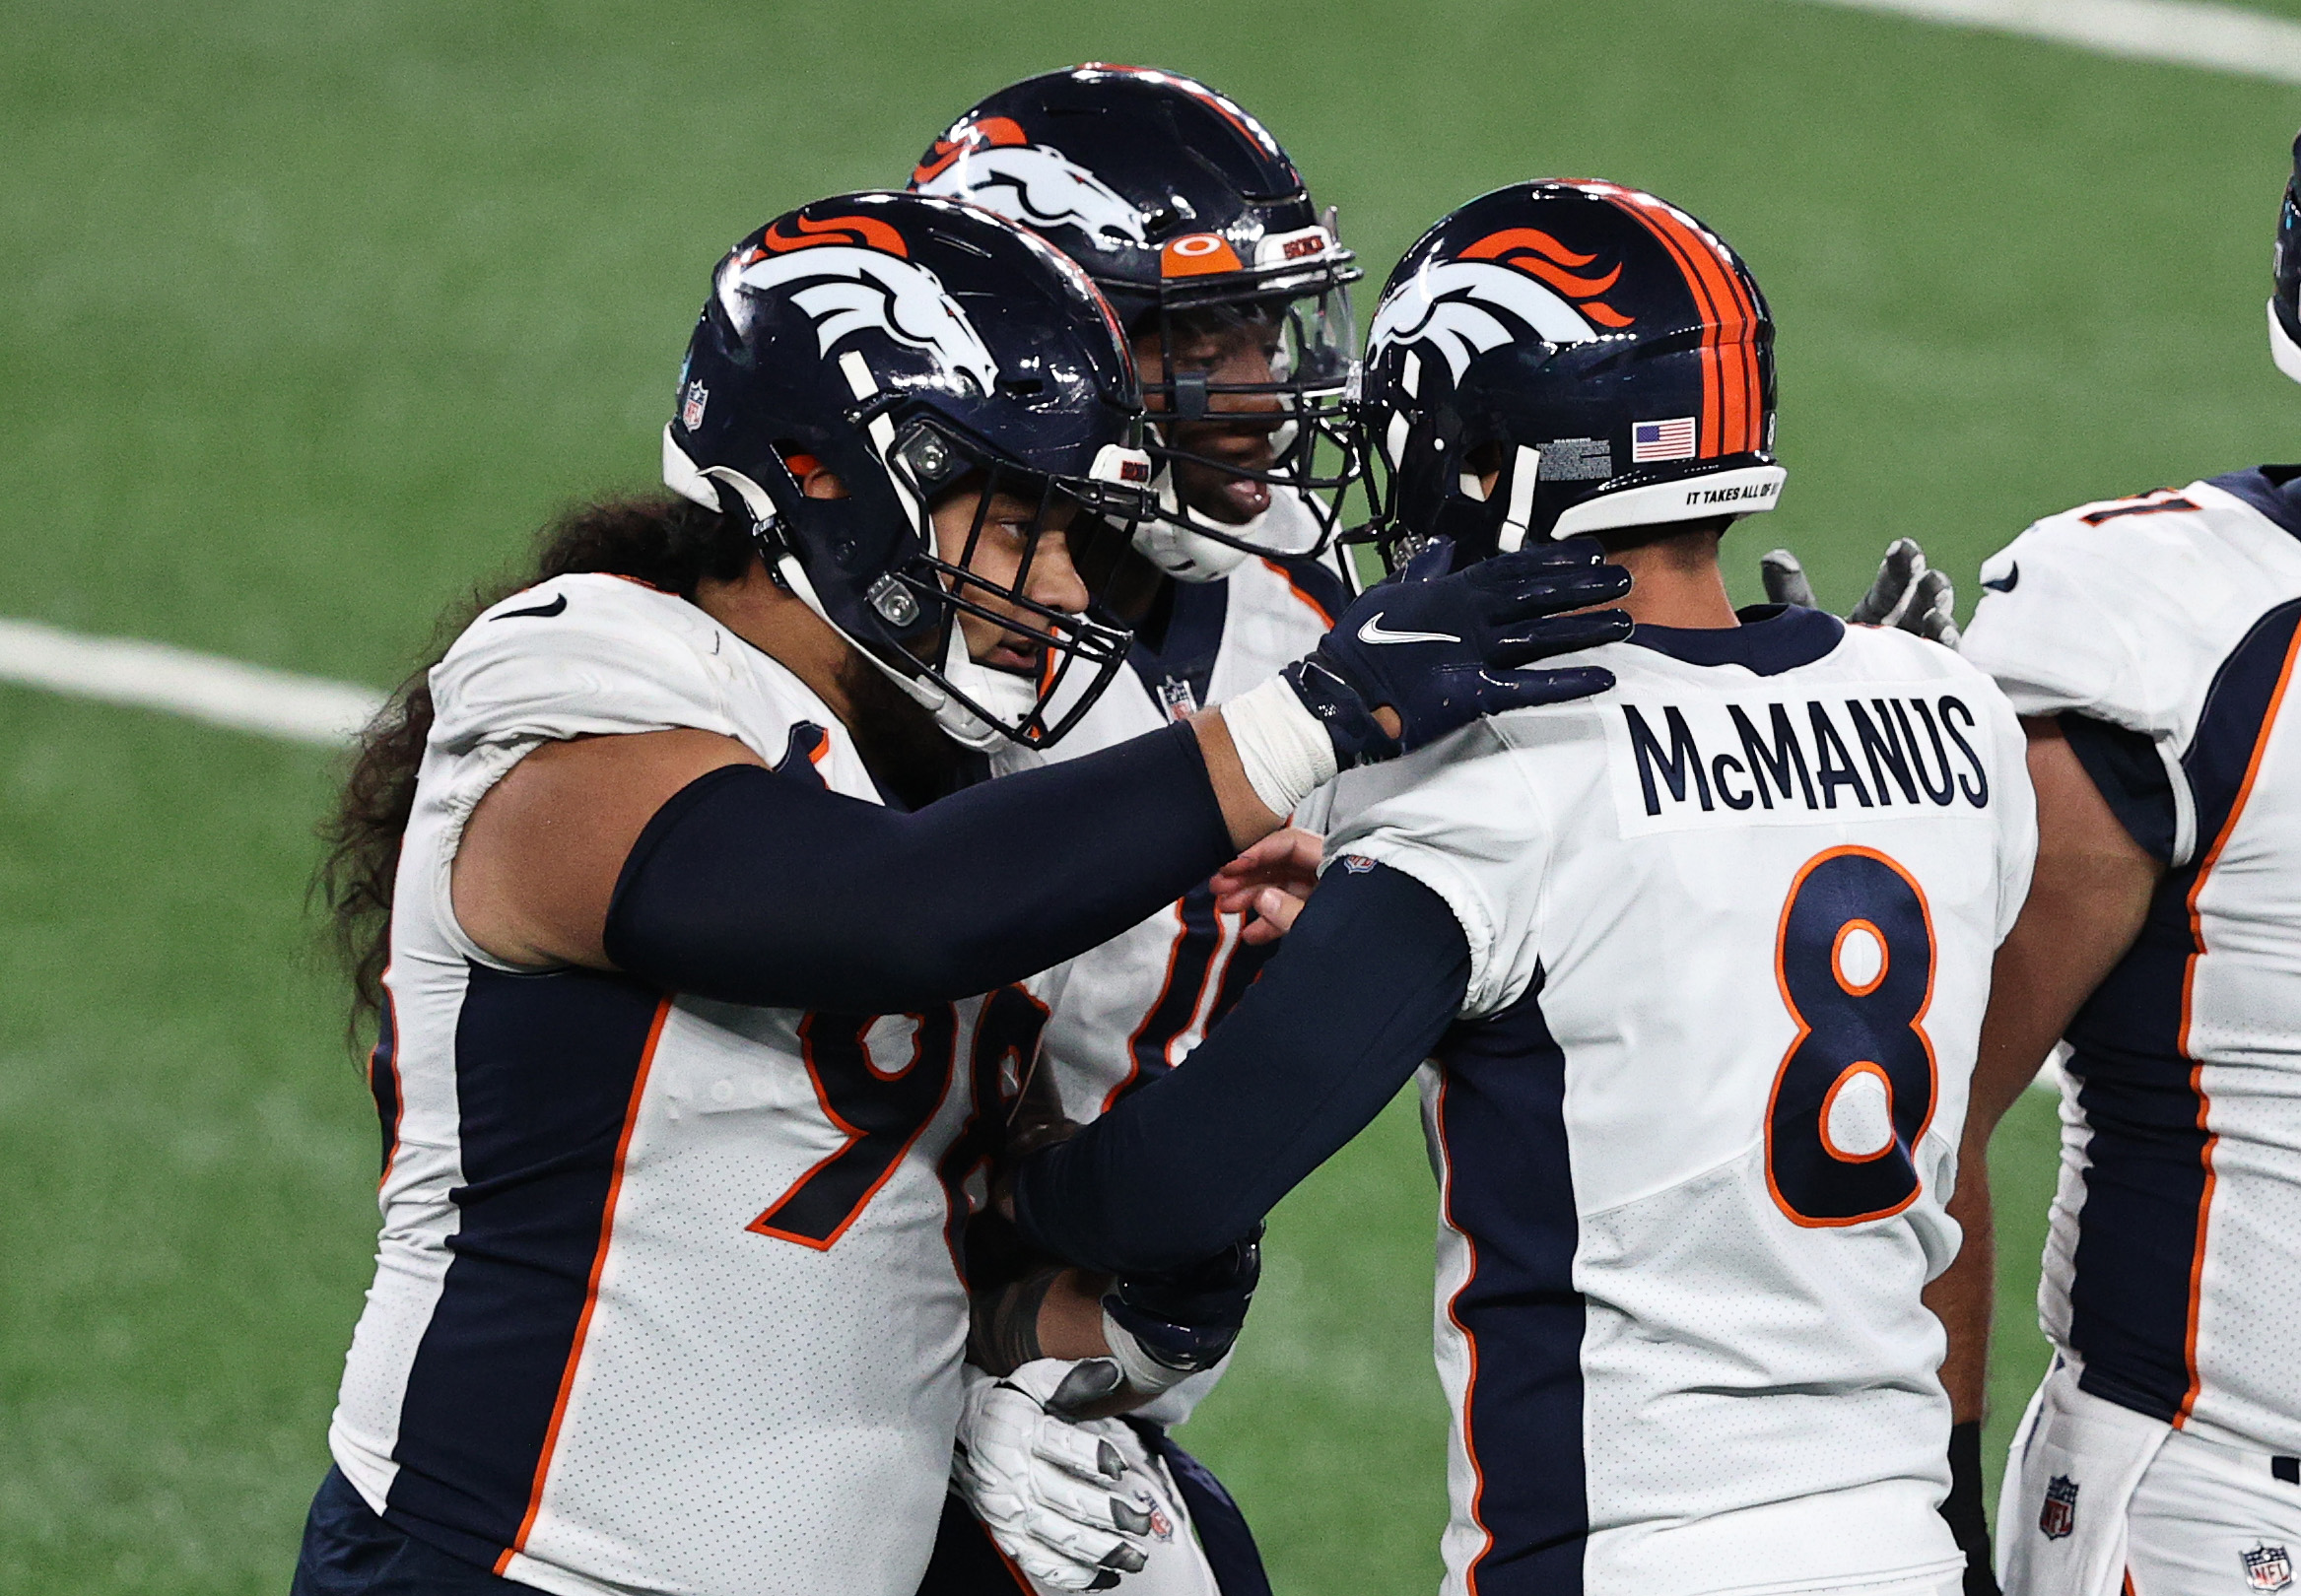 Brandon McManus of the Denver Broncos celebrates a field goal with teammates against the New York Jets during the fourth quarter at MetLife Stadium on Oct. 1, 2020 in East Rutherford, New Jersey.